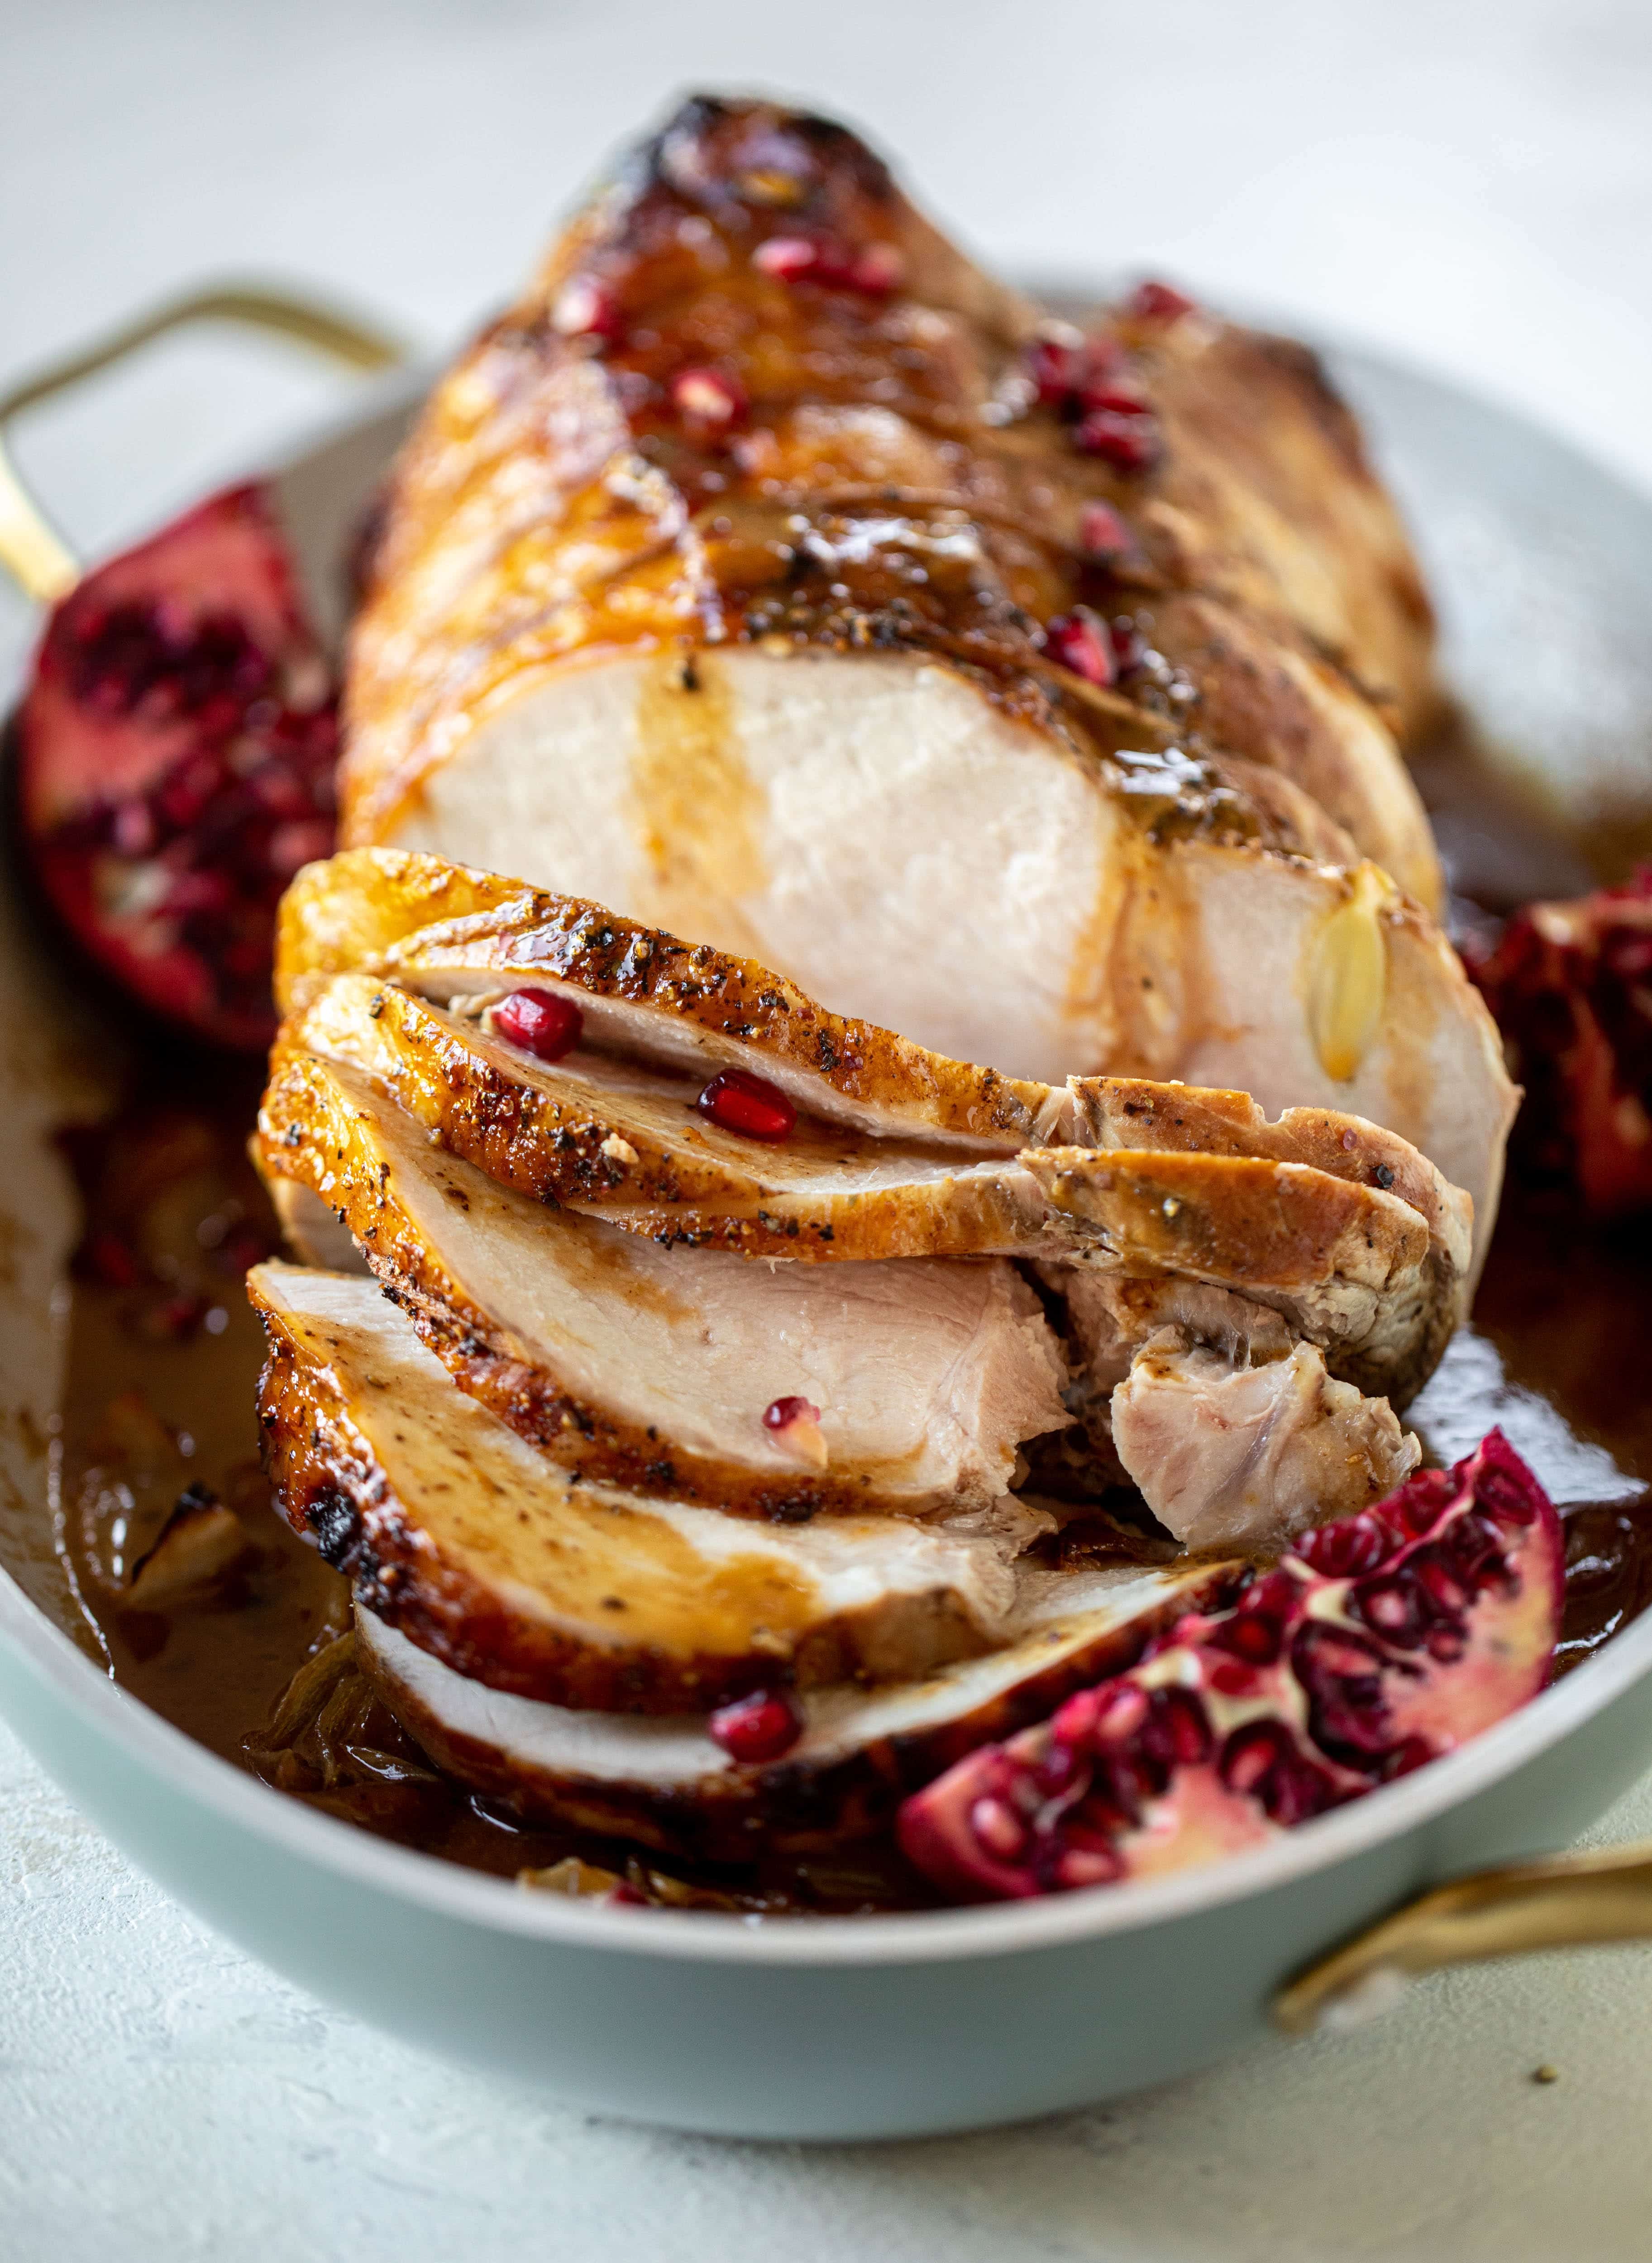 This pork loin roast is perfect for the holiday or winter season! Pomegranate and cider glazed, it's wonderful! Serve with smashed rosemary potatoes.